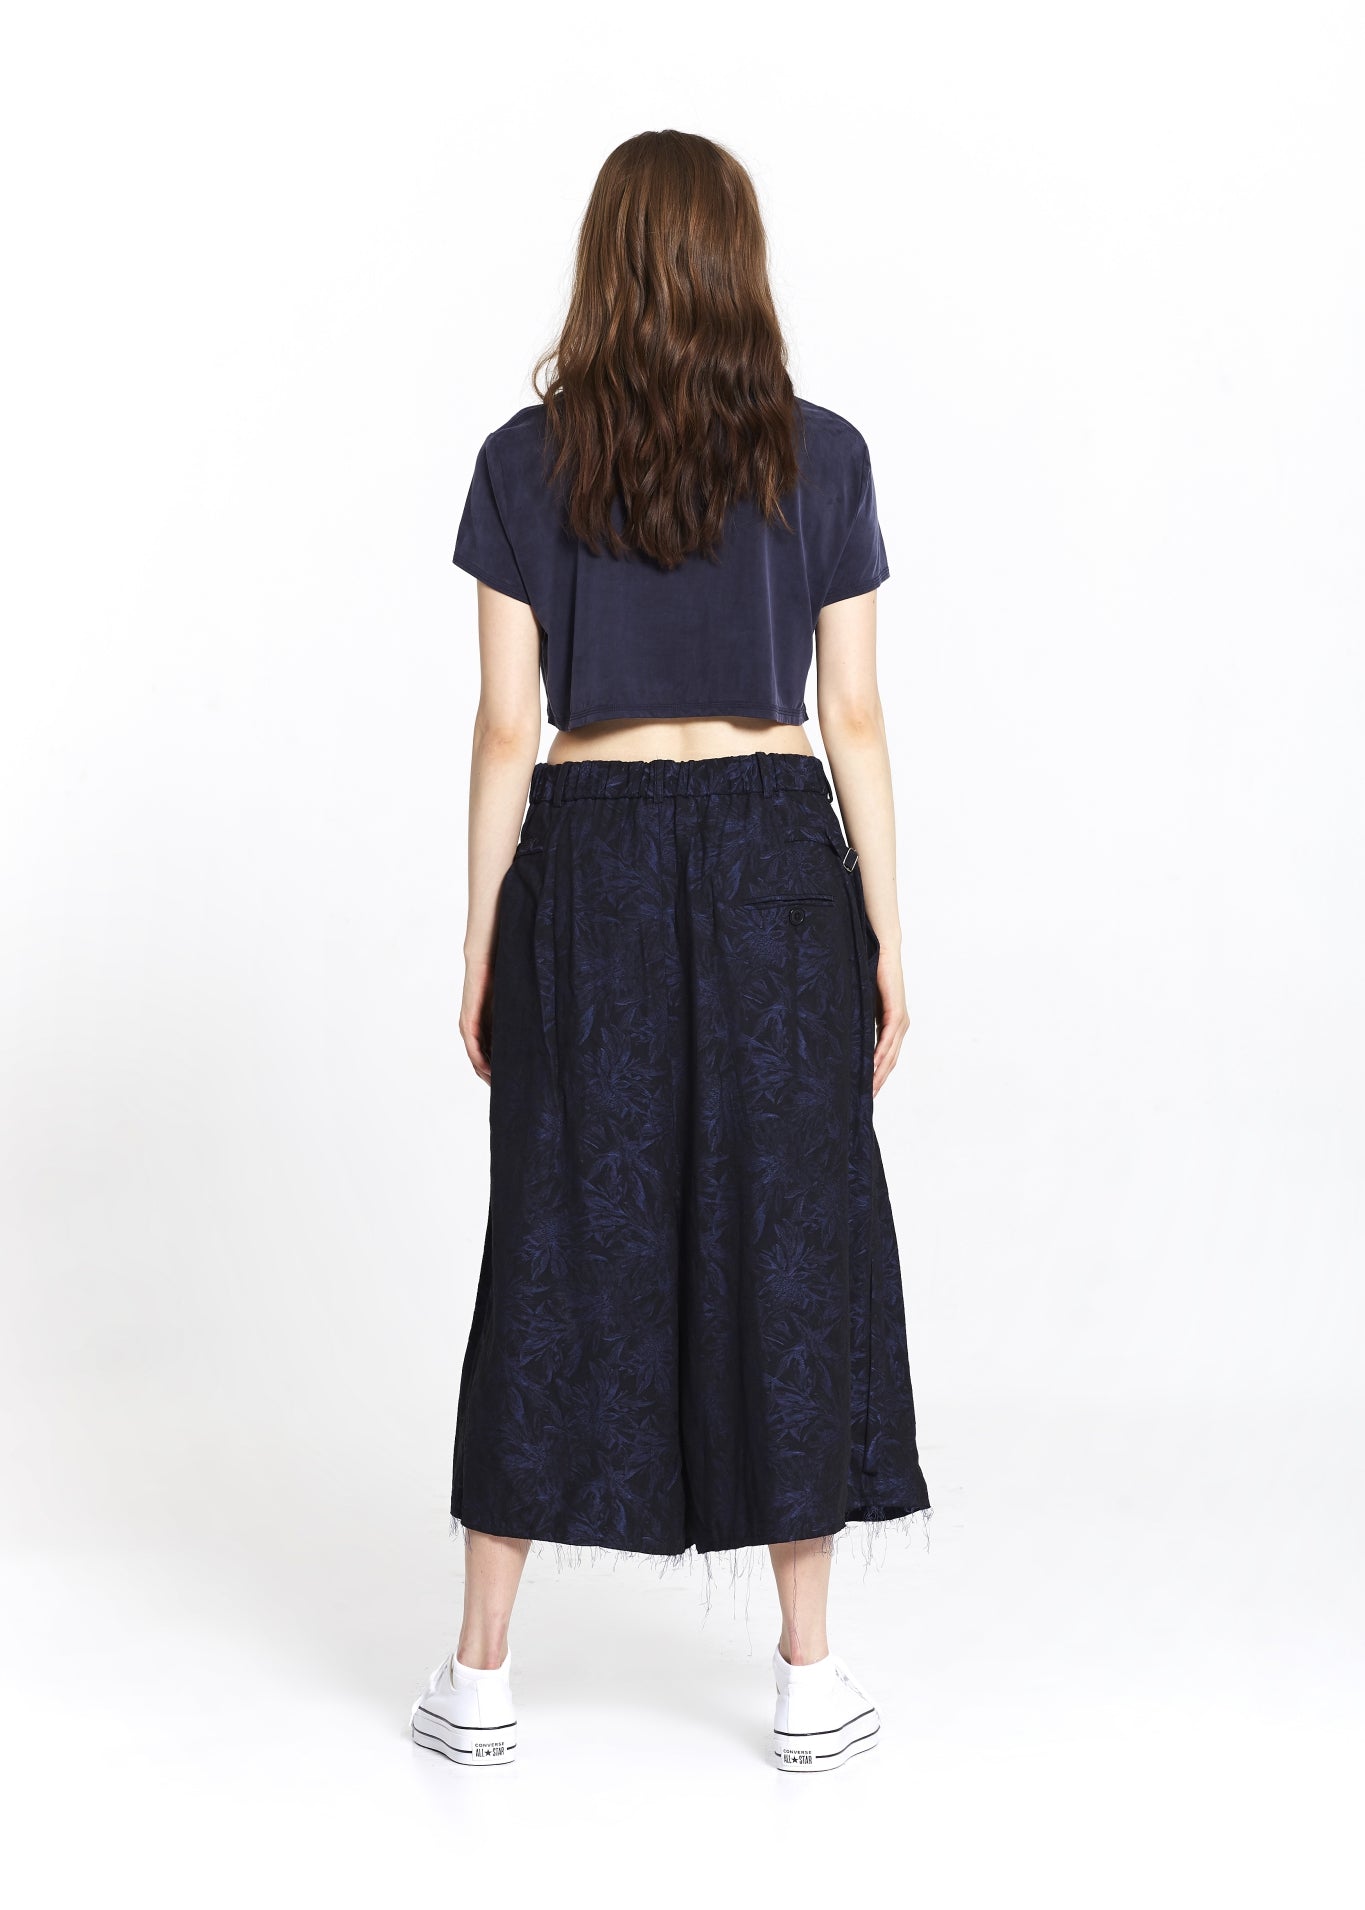 "The Skirt Pant" in Blue Floral